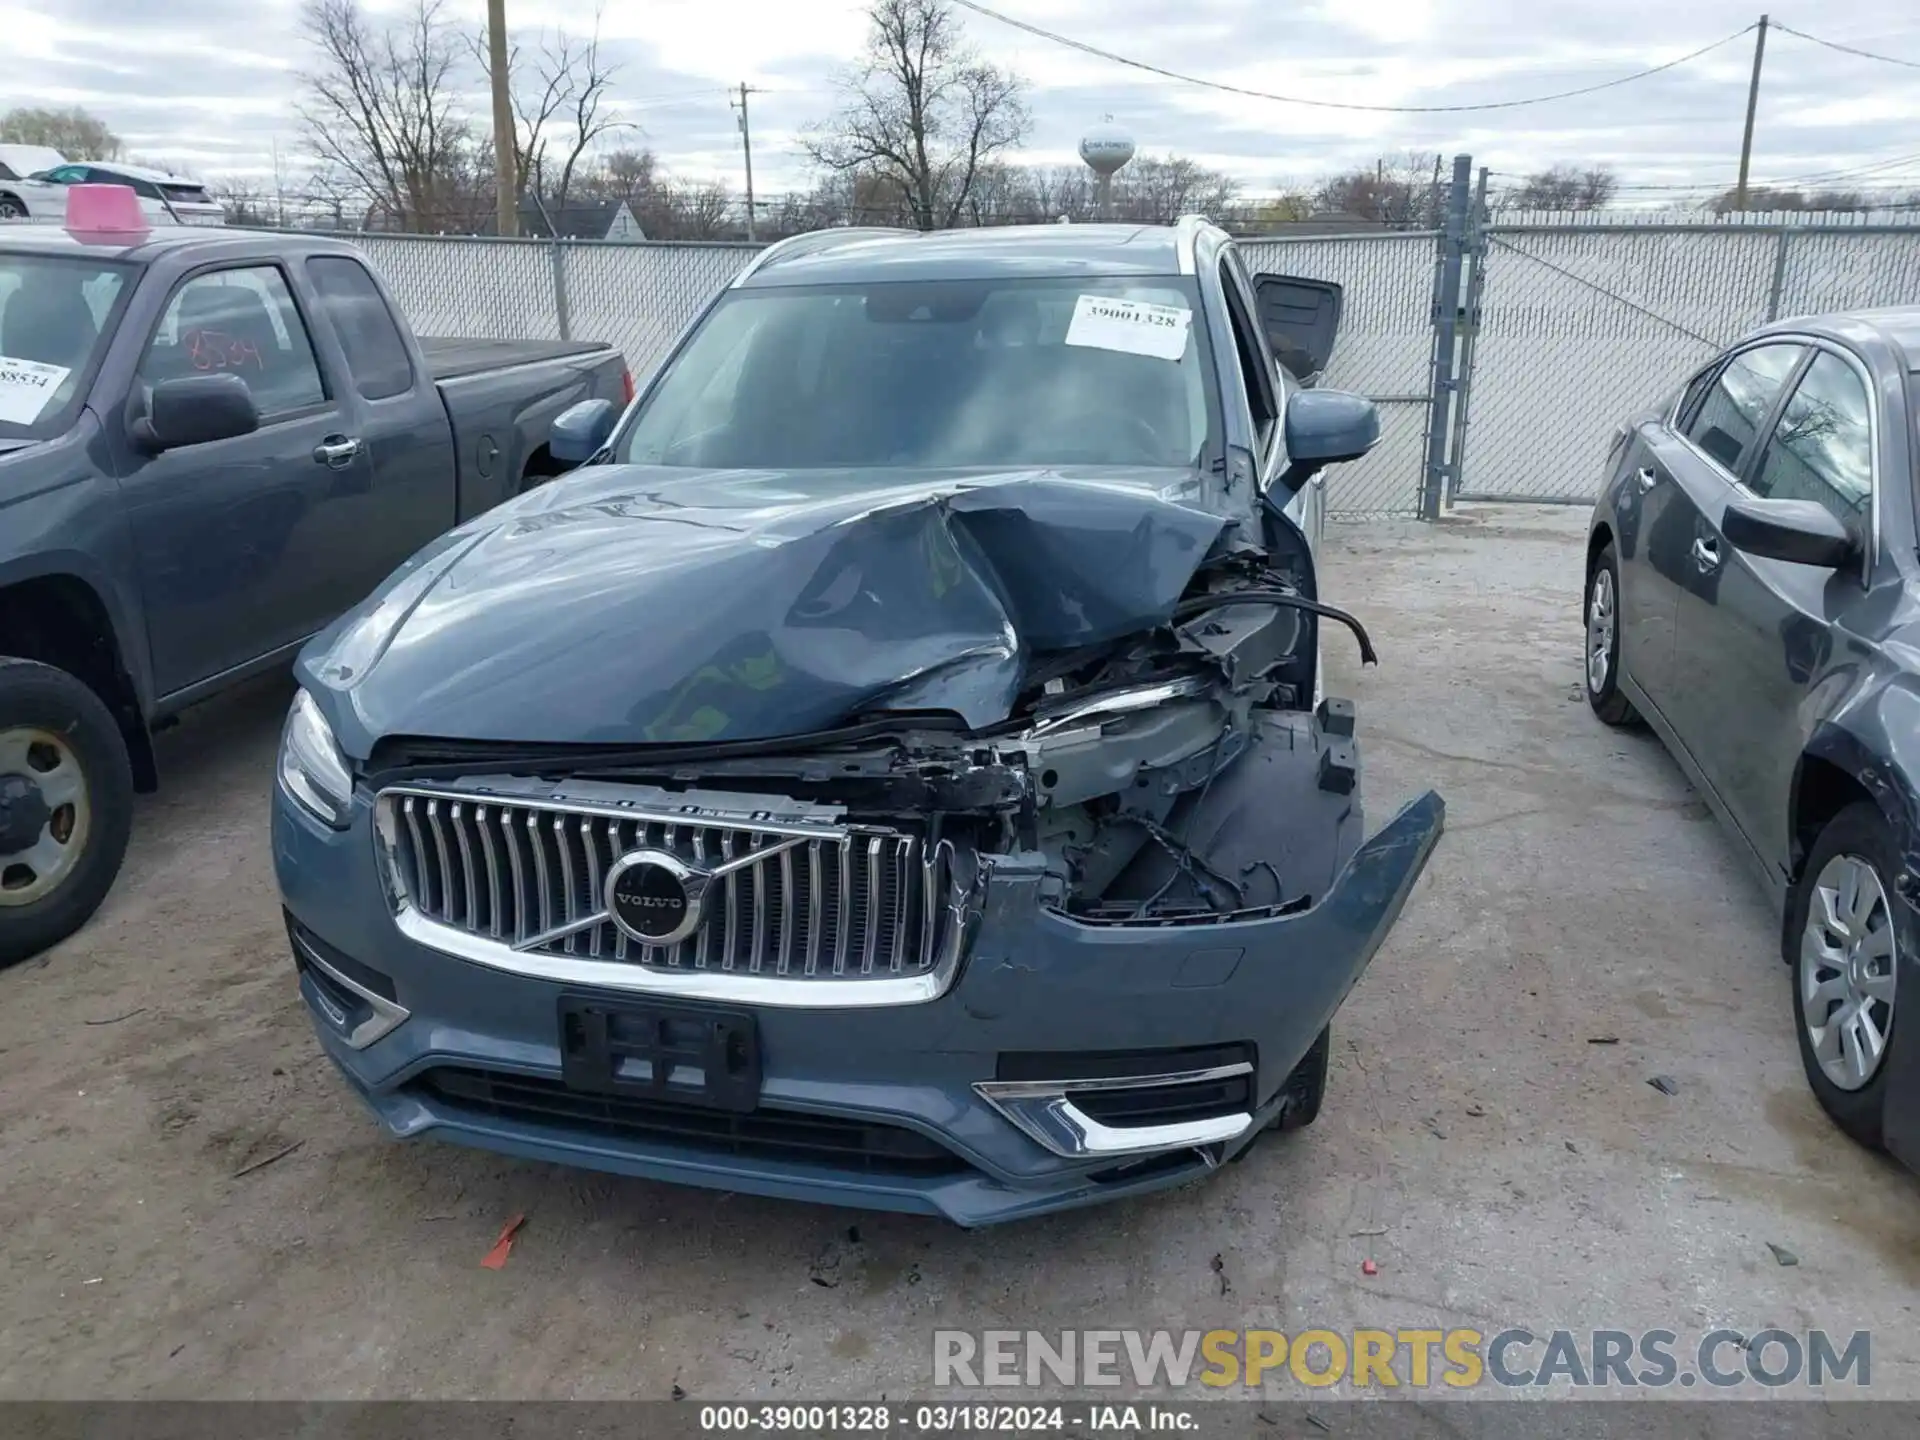 13 Photograph of a damaged car YV4A221L7M1756828 VOLVO XC90 2021